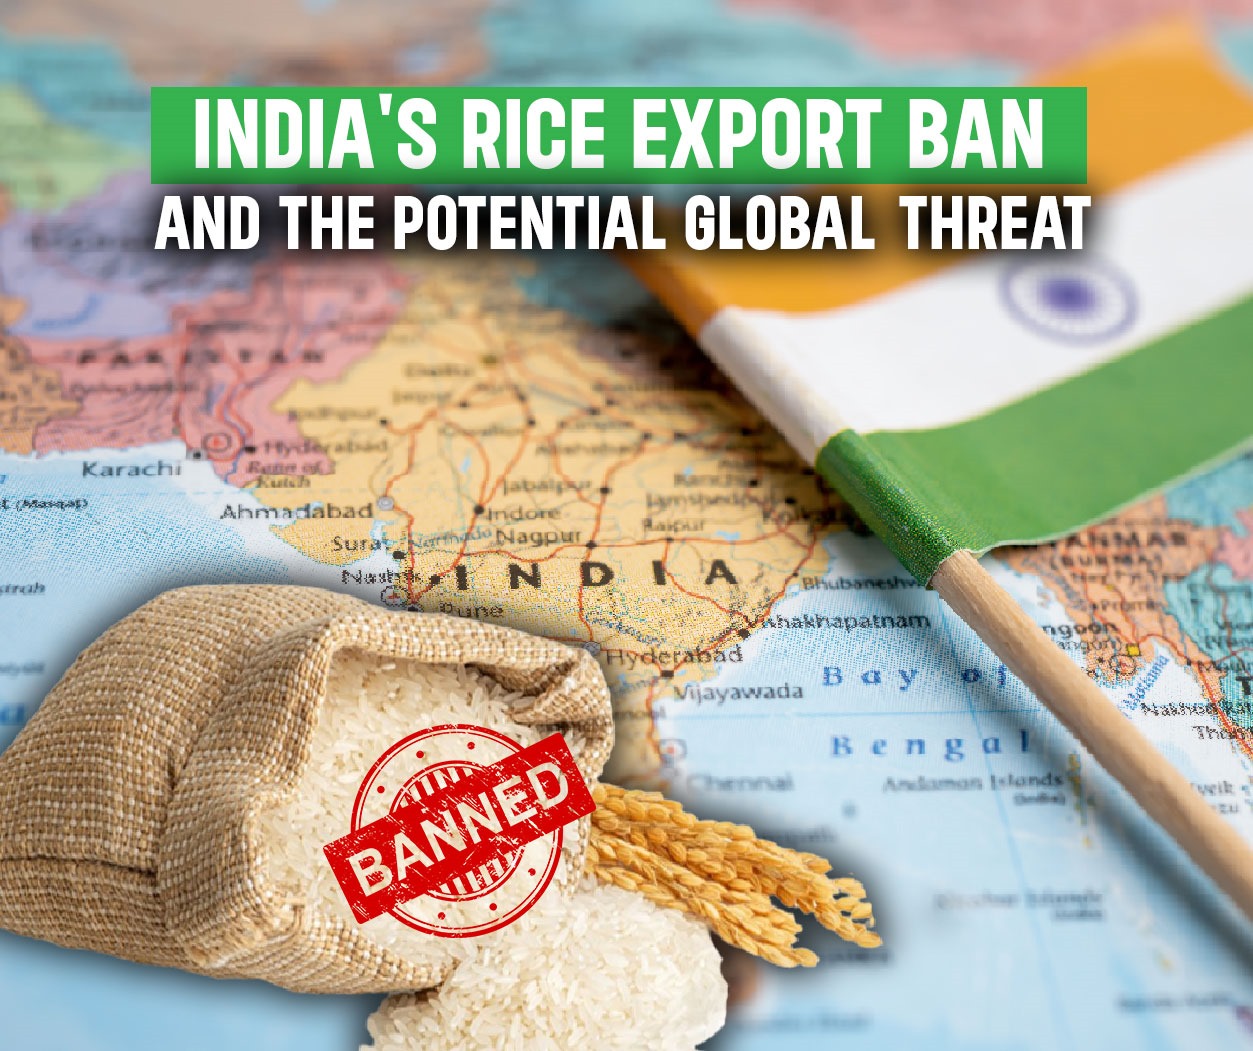 India's Rice Export Ban and the Potential Global Threat